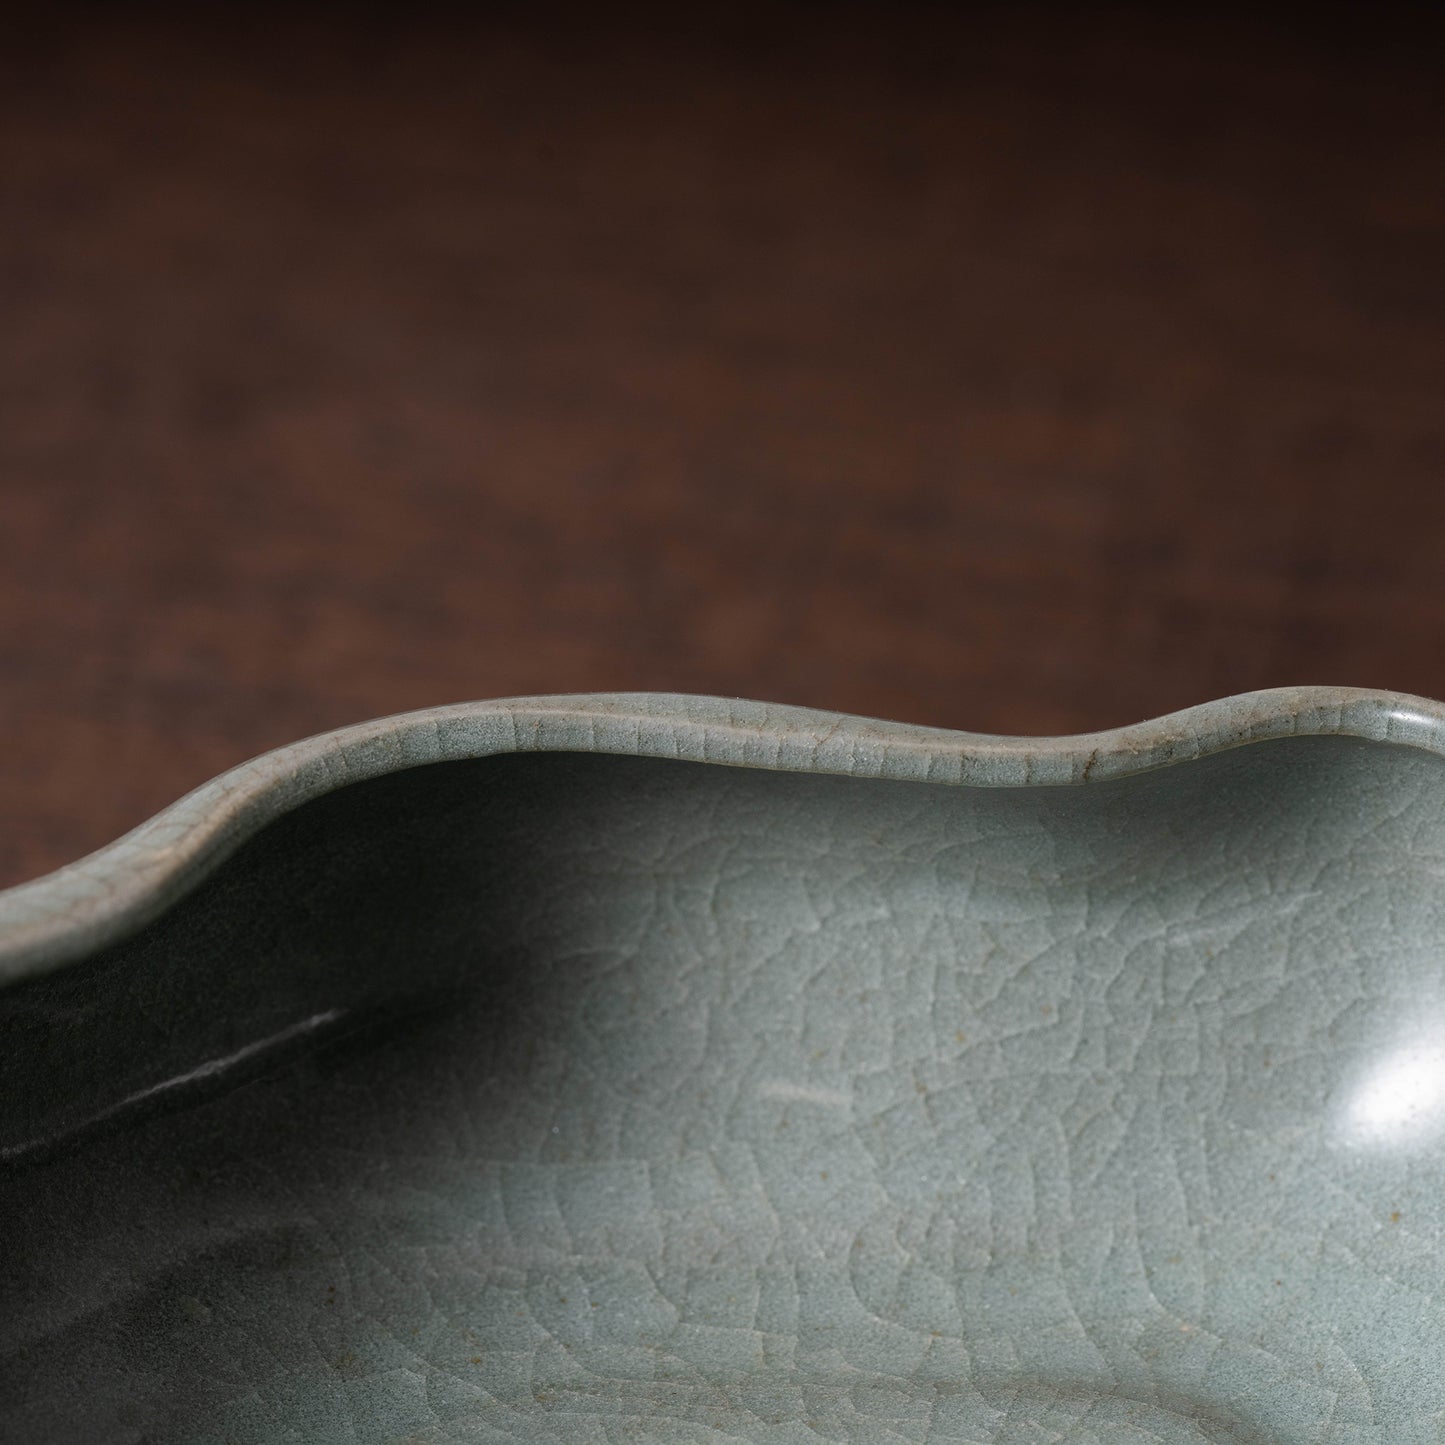 Southern Song Dynasty Guanware Celadon Bowl with Peach Shaped